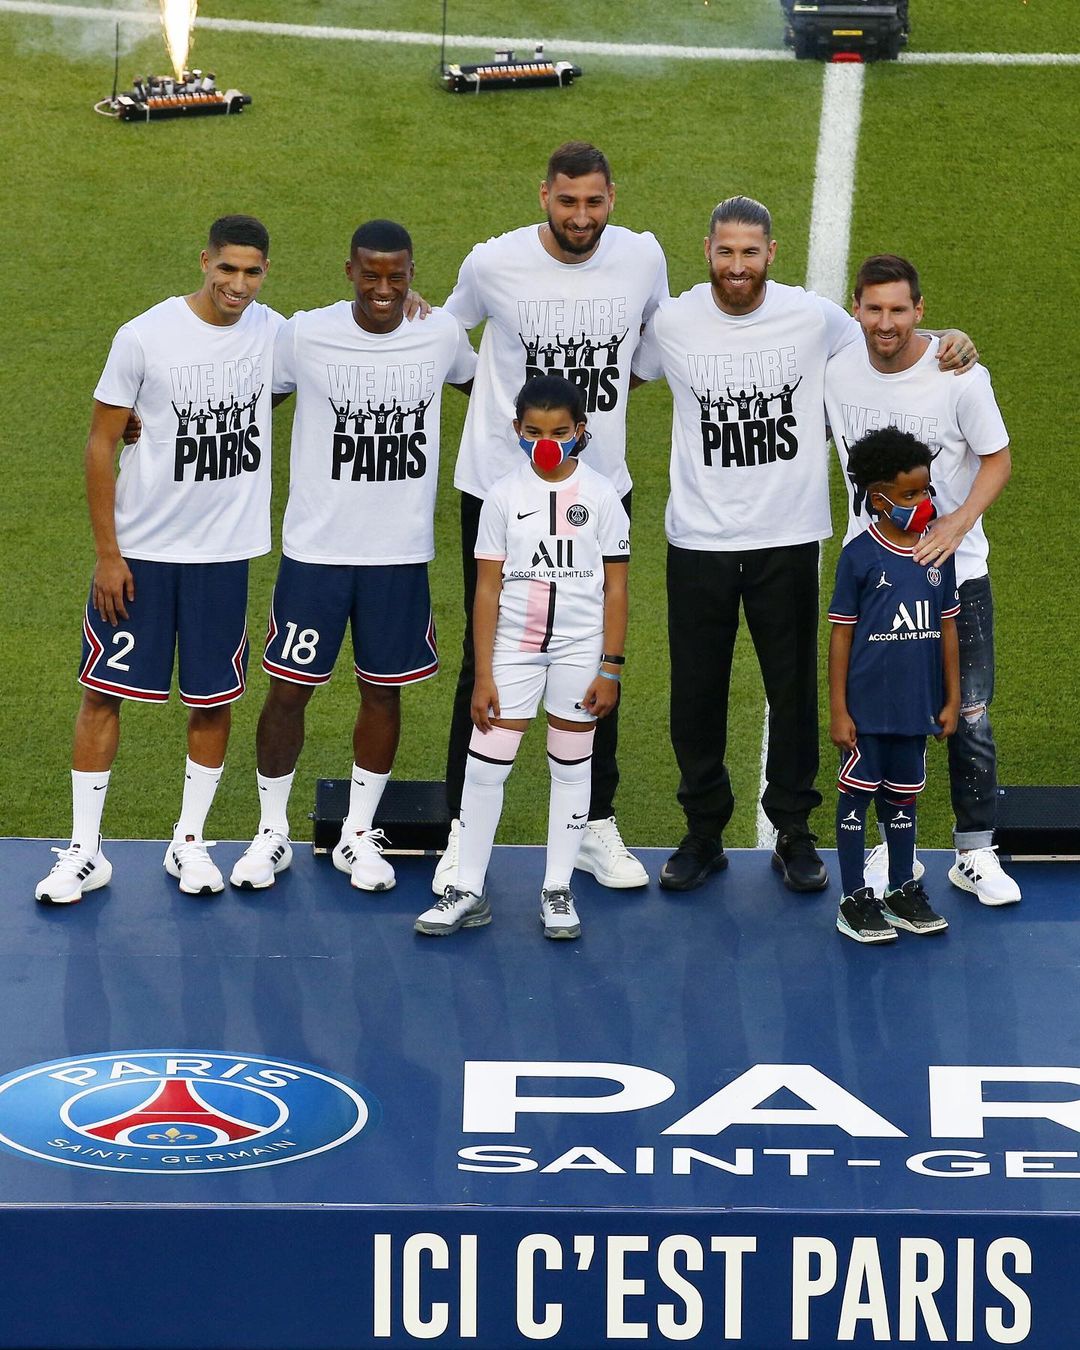 Watch Video OF Th Amazing Moment PSG Presented Mess, Ramos, And Other New Players To Fans